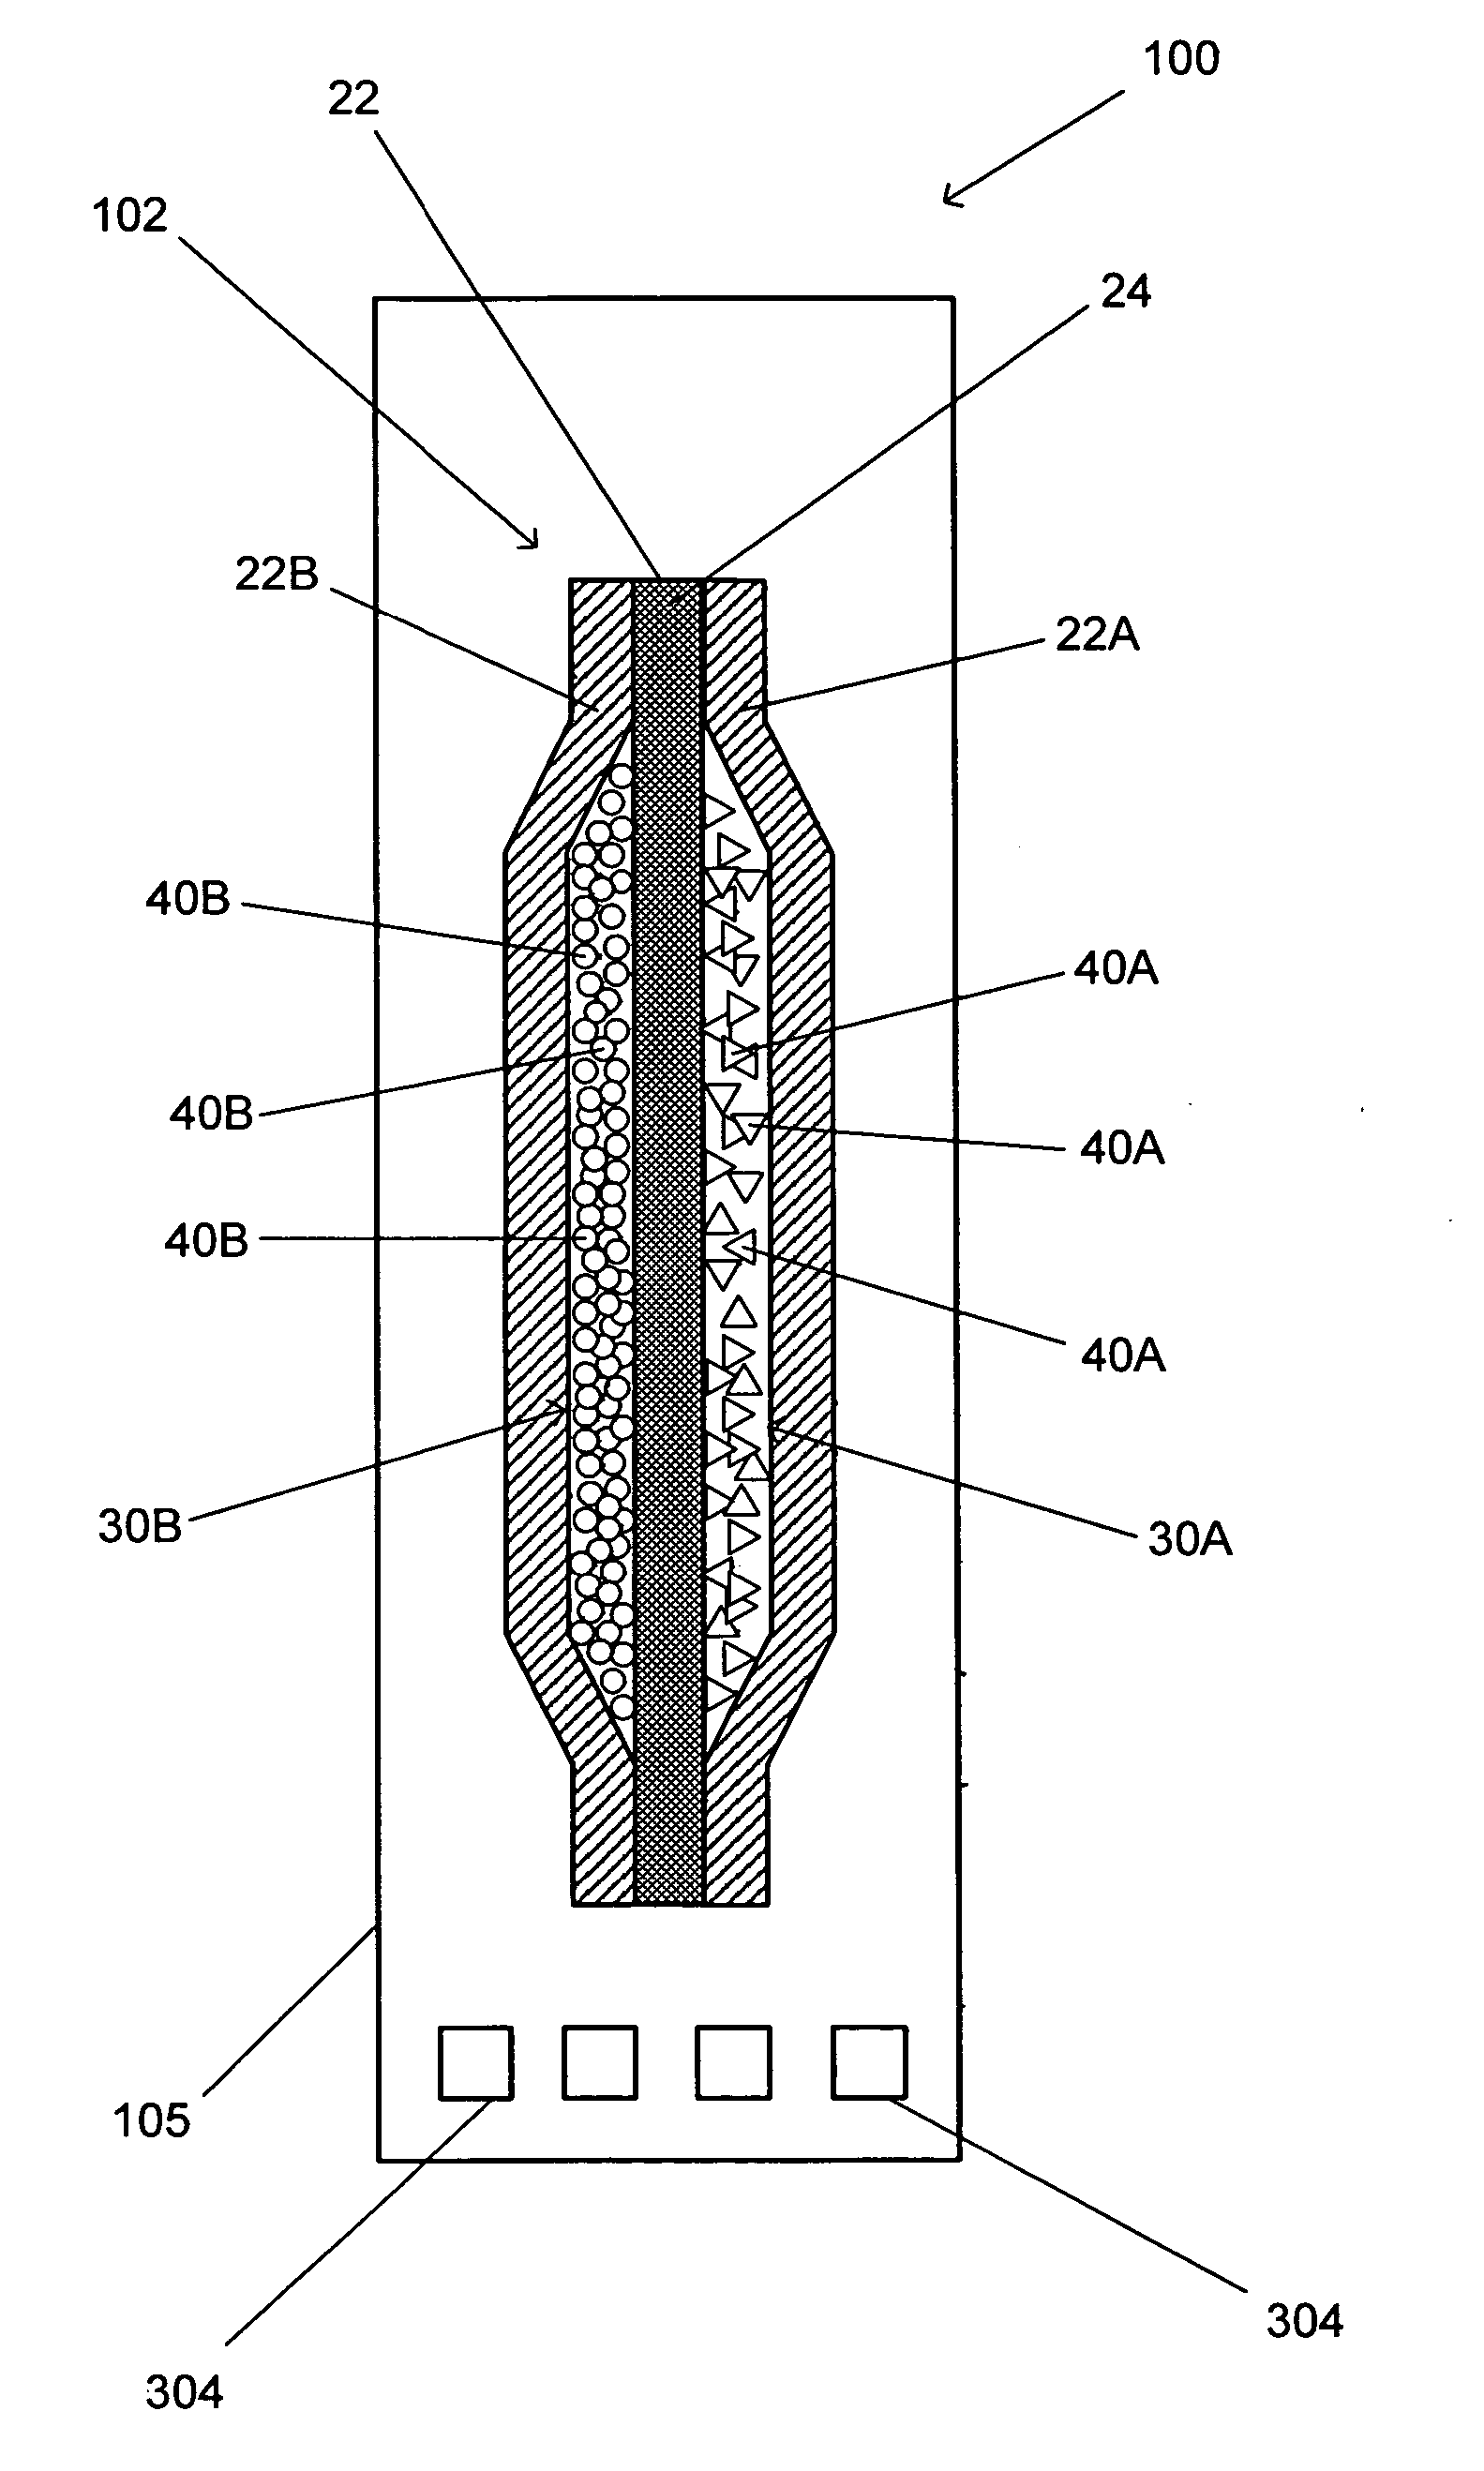 Systems and methods for producing aqueous solutions and gases having disinfecting properties and substantially eliminating impurities